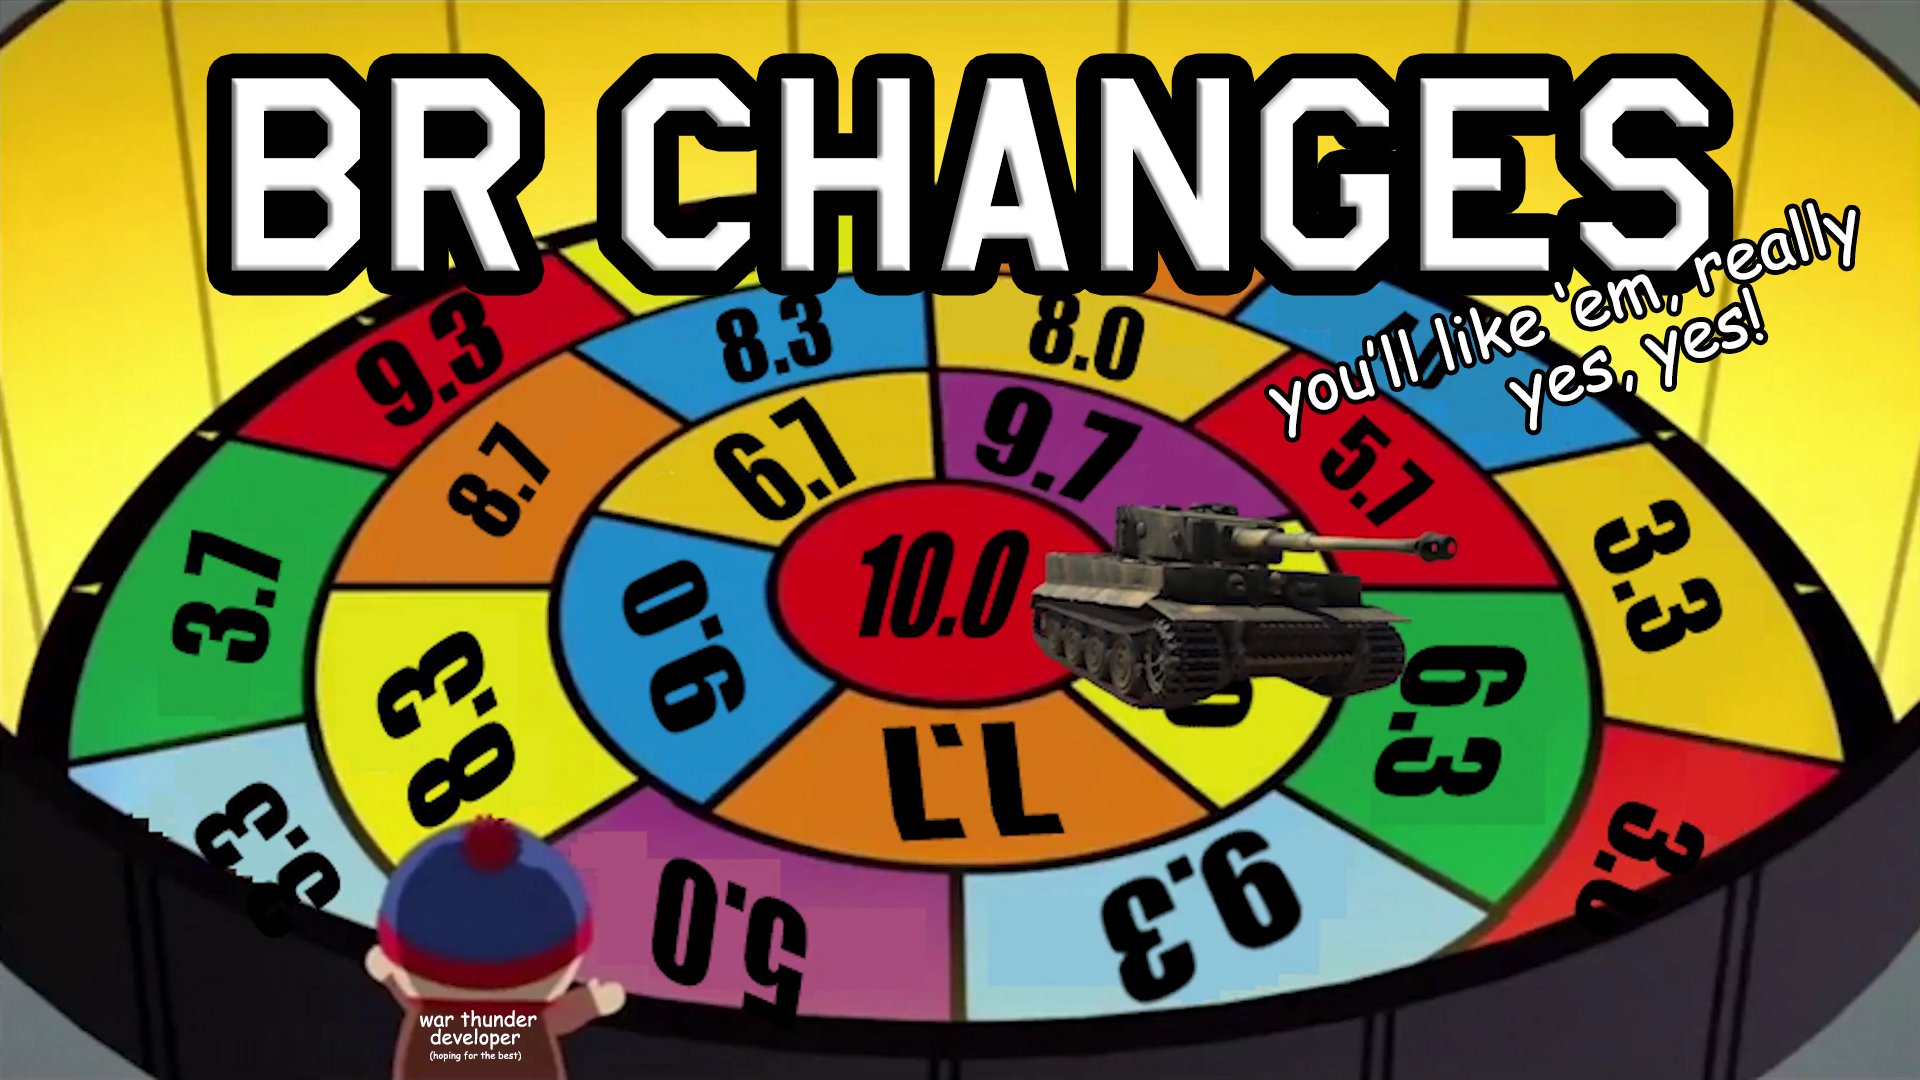 War Thunder We Ve Already Explained How We Calculate Battle Ratings Yesterday Now It S Time For Some Actual Changes T Co Rltuxamvjz T Co Mea71tsaco Twitter